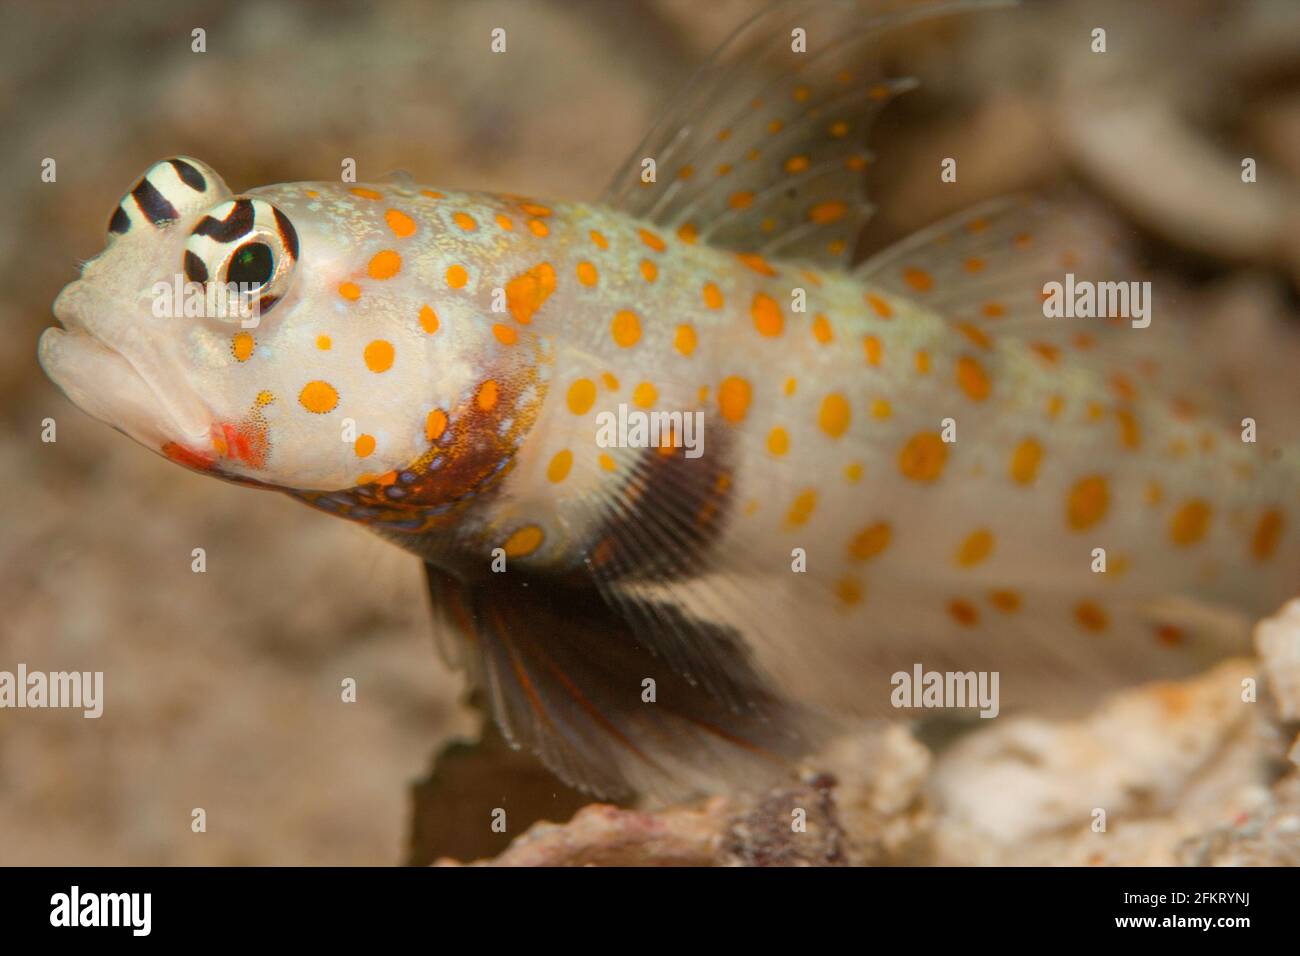 Spotted Shrimpgoby (Amblyeleotris guttata) guarding its home in the sand which it shares with a shrimp. The Gobies stand guard while the shrimps clean Stock Photo